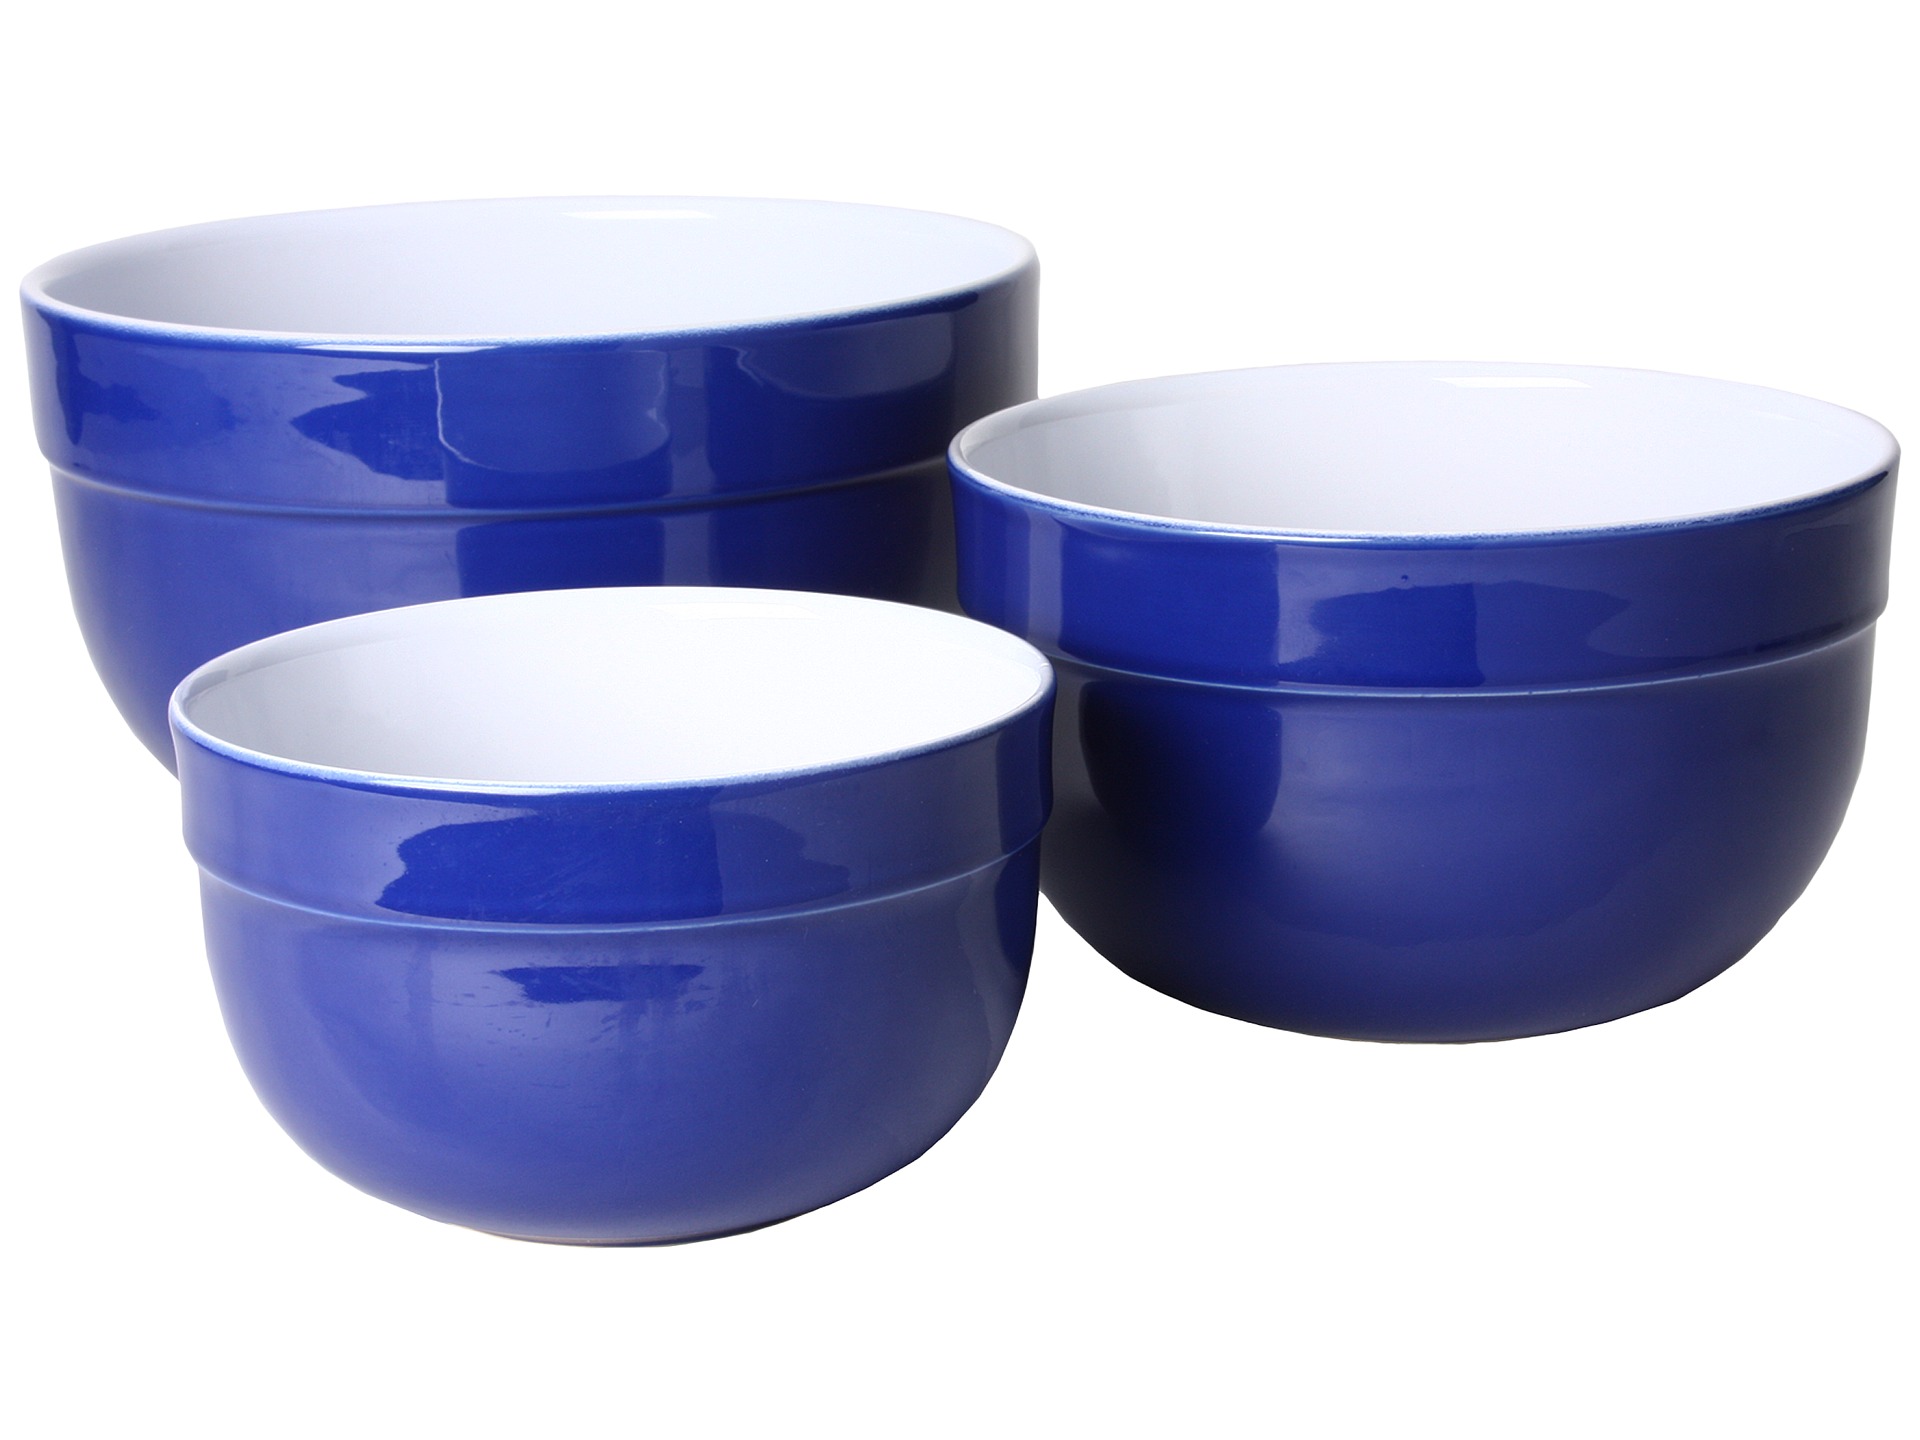 Emile Henry   Classics® Mixing Bowl Set   Special Promotion